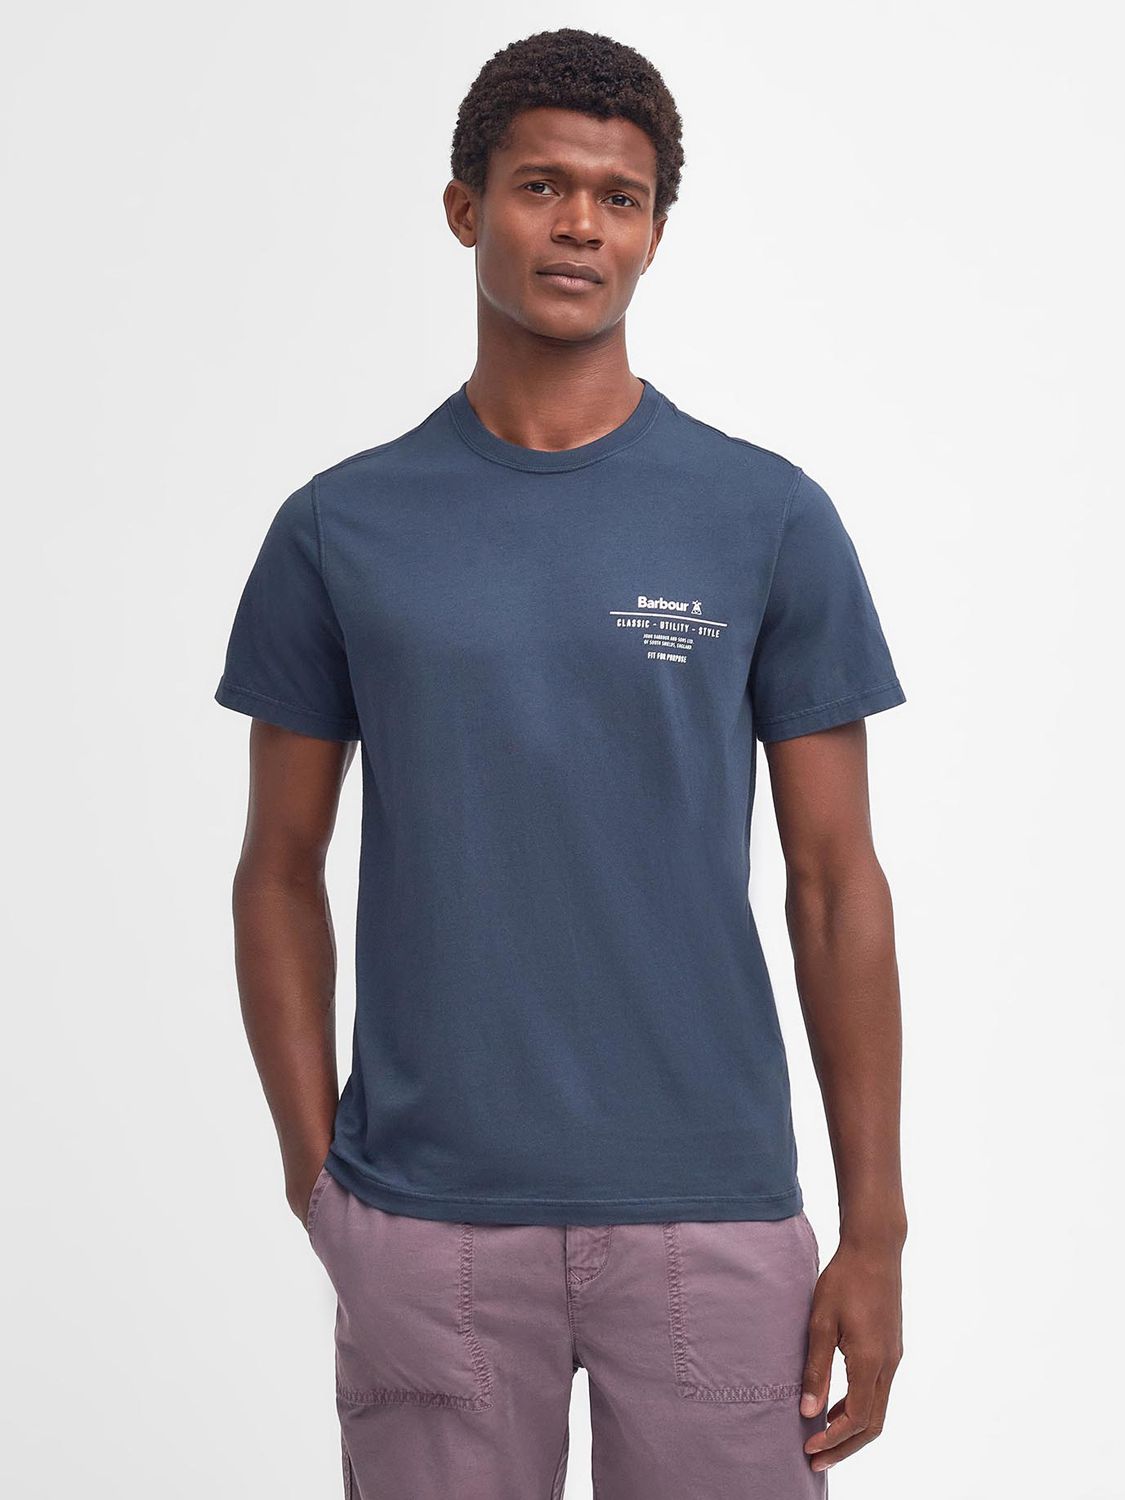 Barbour Hickling T-Shirt, Navy, M